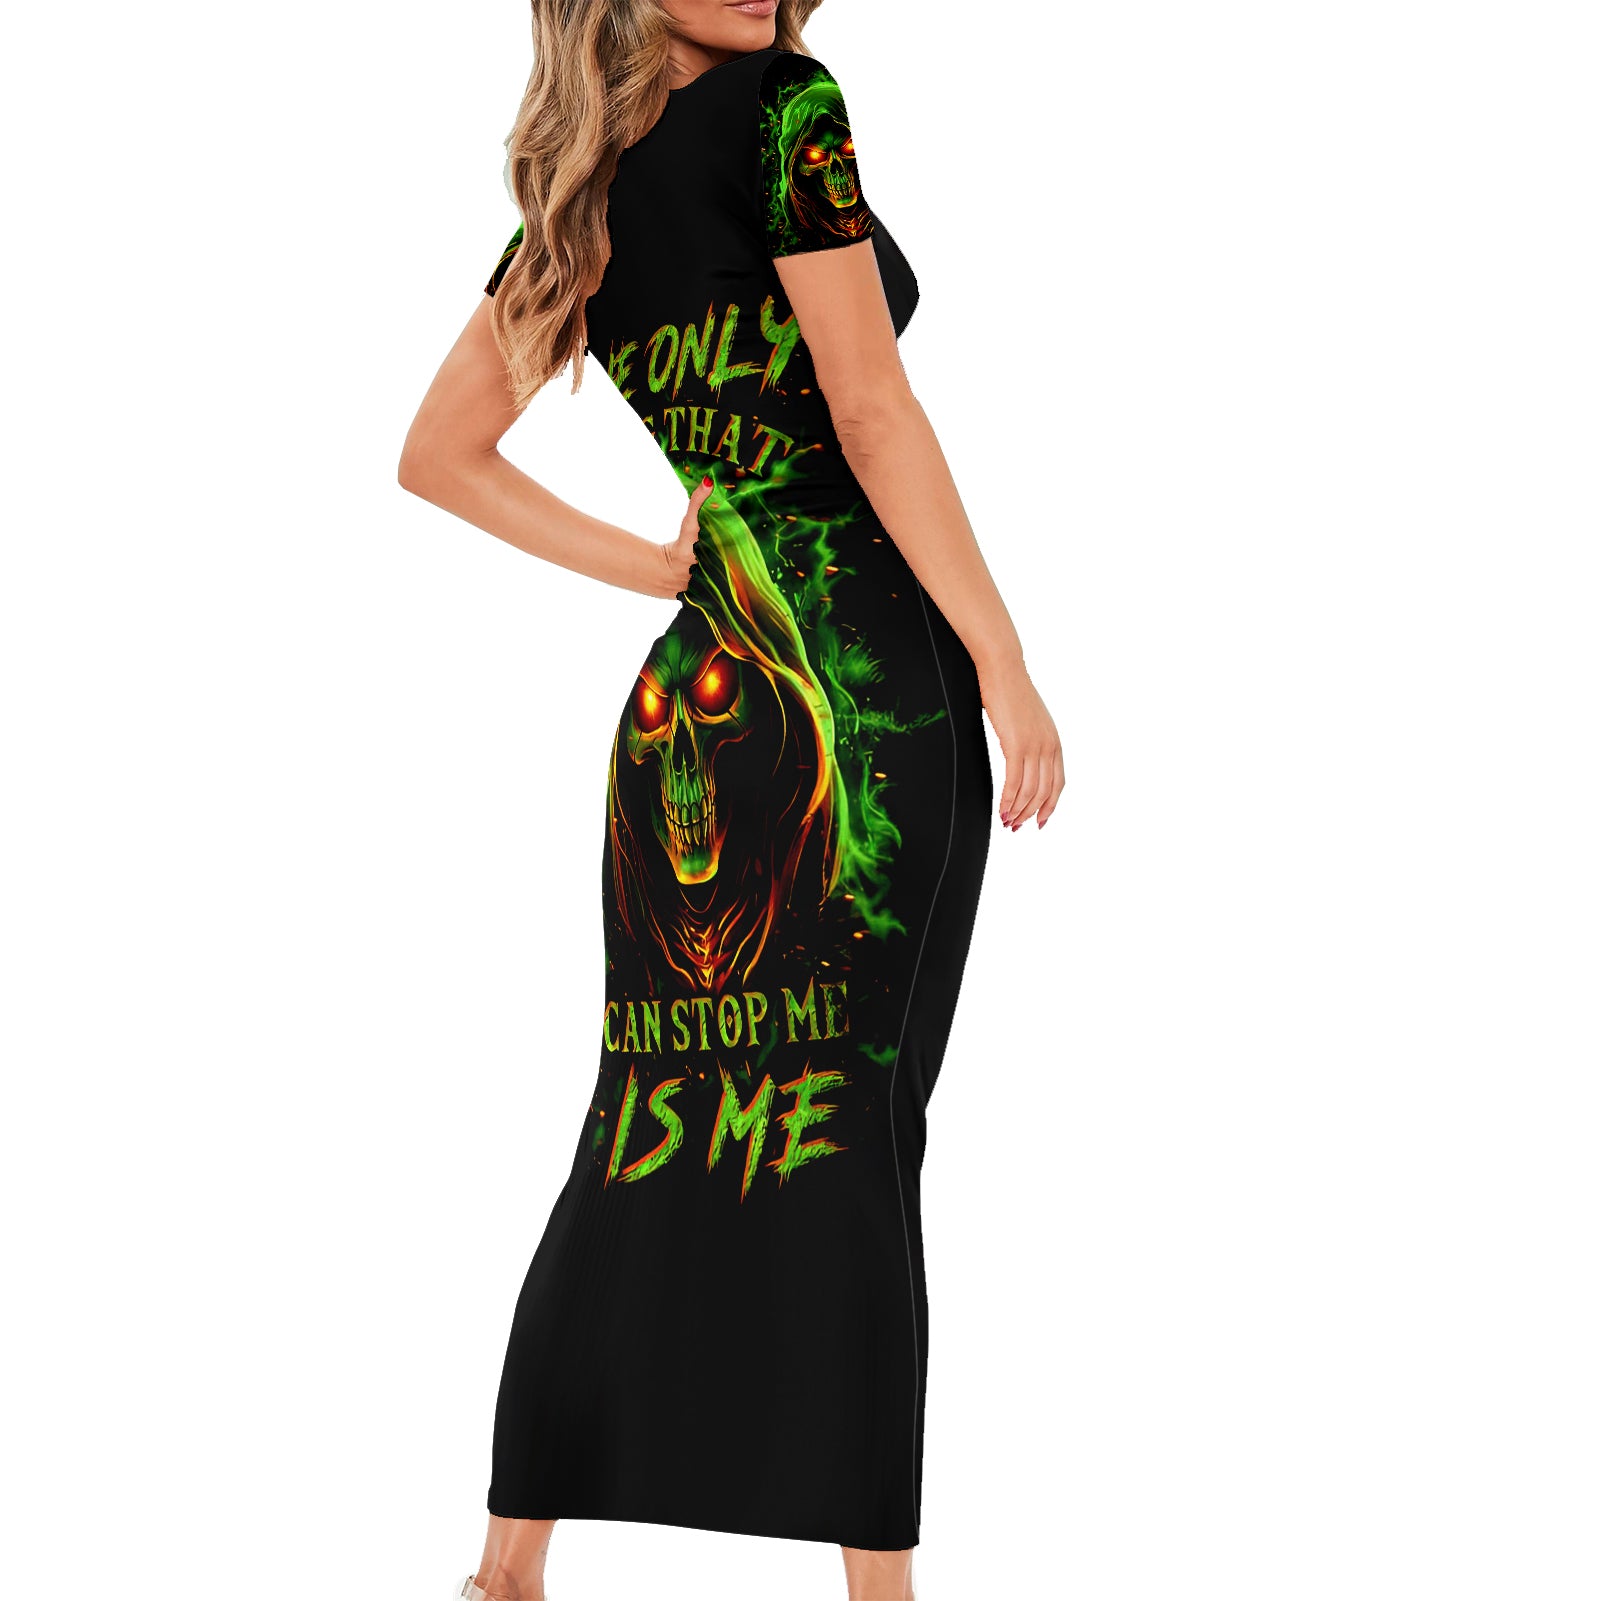 fire-death-skull-short-sleeve-bodycon-dress-the-only-thing-that-can-stop-is-me